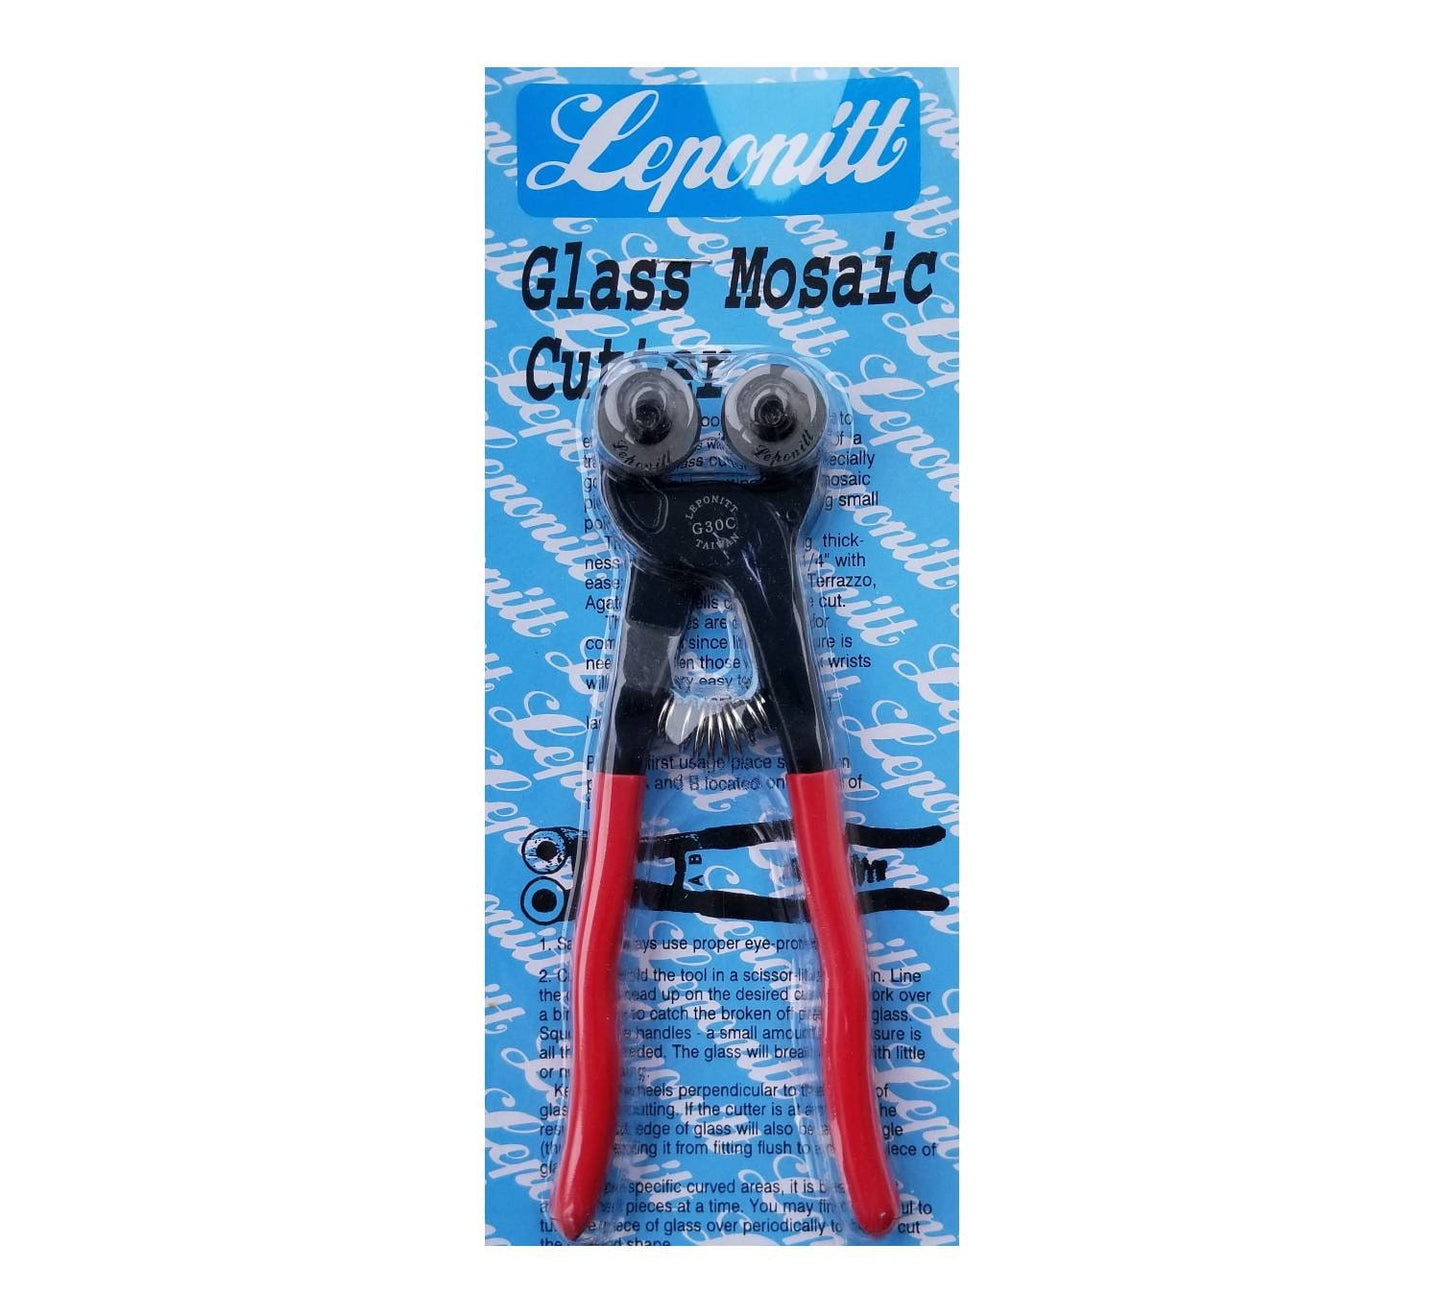 Stained Glass Mosaic Pliers. Wheeled Blades forces a break where you want it. Liponett Brand, well made. Replacement Parts sold separately